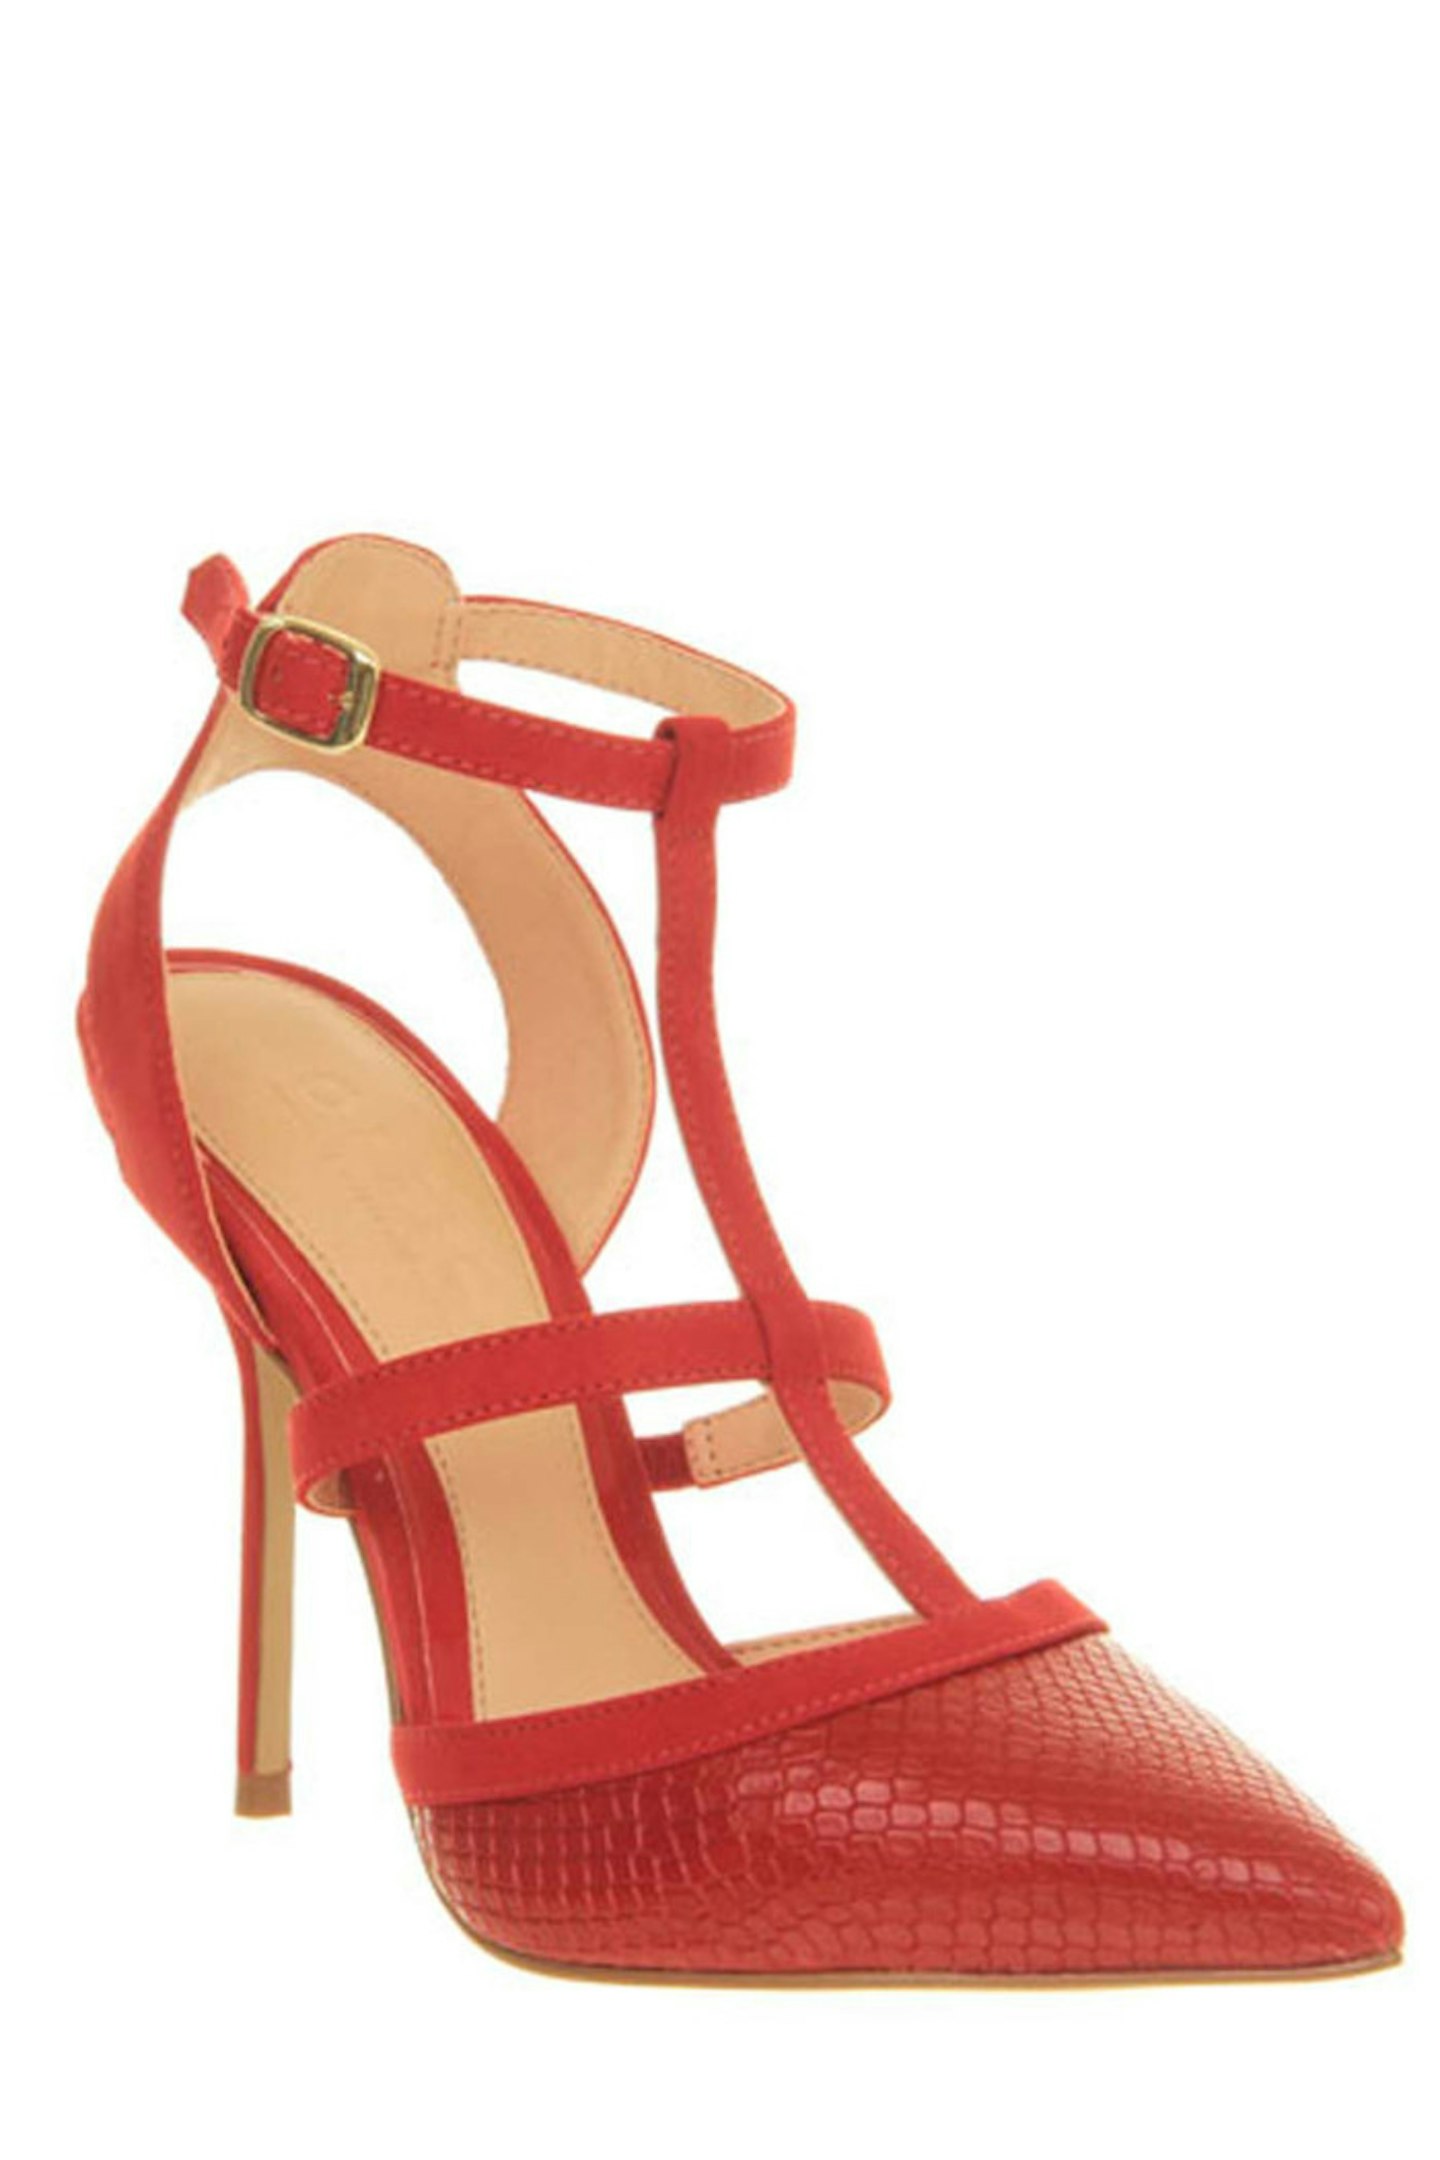 10. Jewel T Bar Point Red Leather Heel